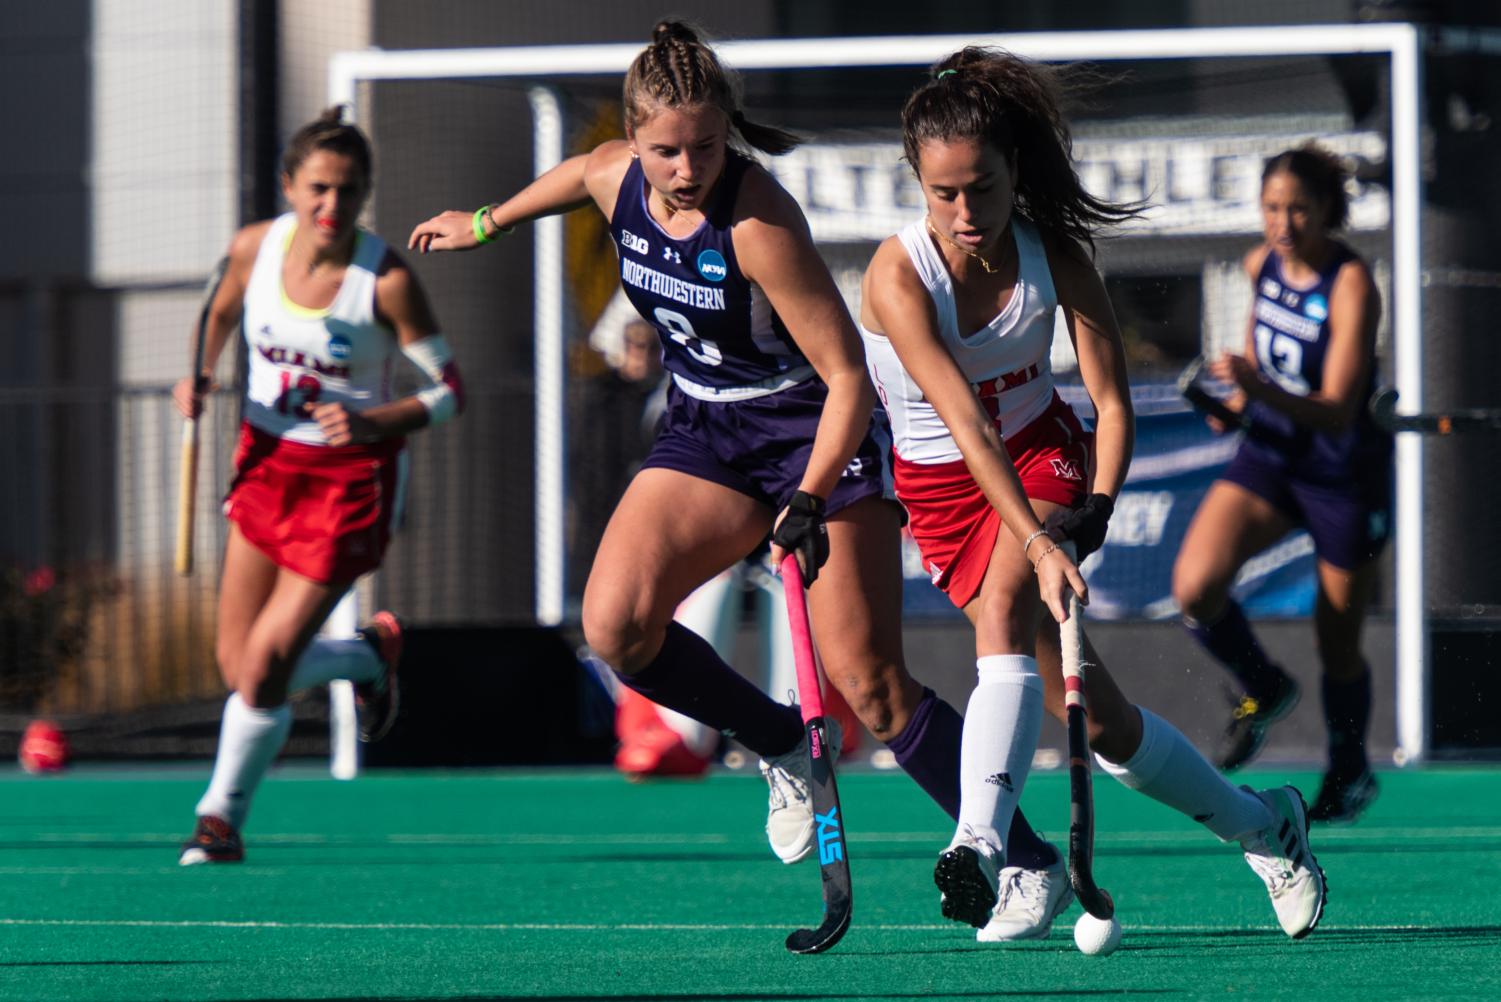 A field hockey player in a purple jersey chases alongside a player in a white jersey who has the ball under their stick.